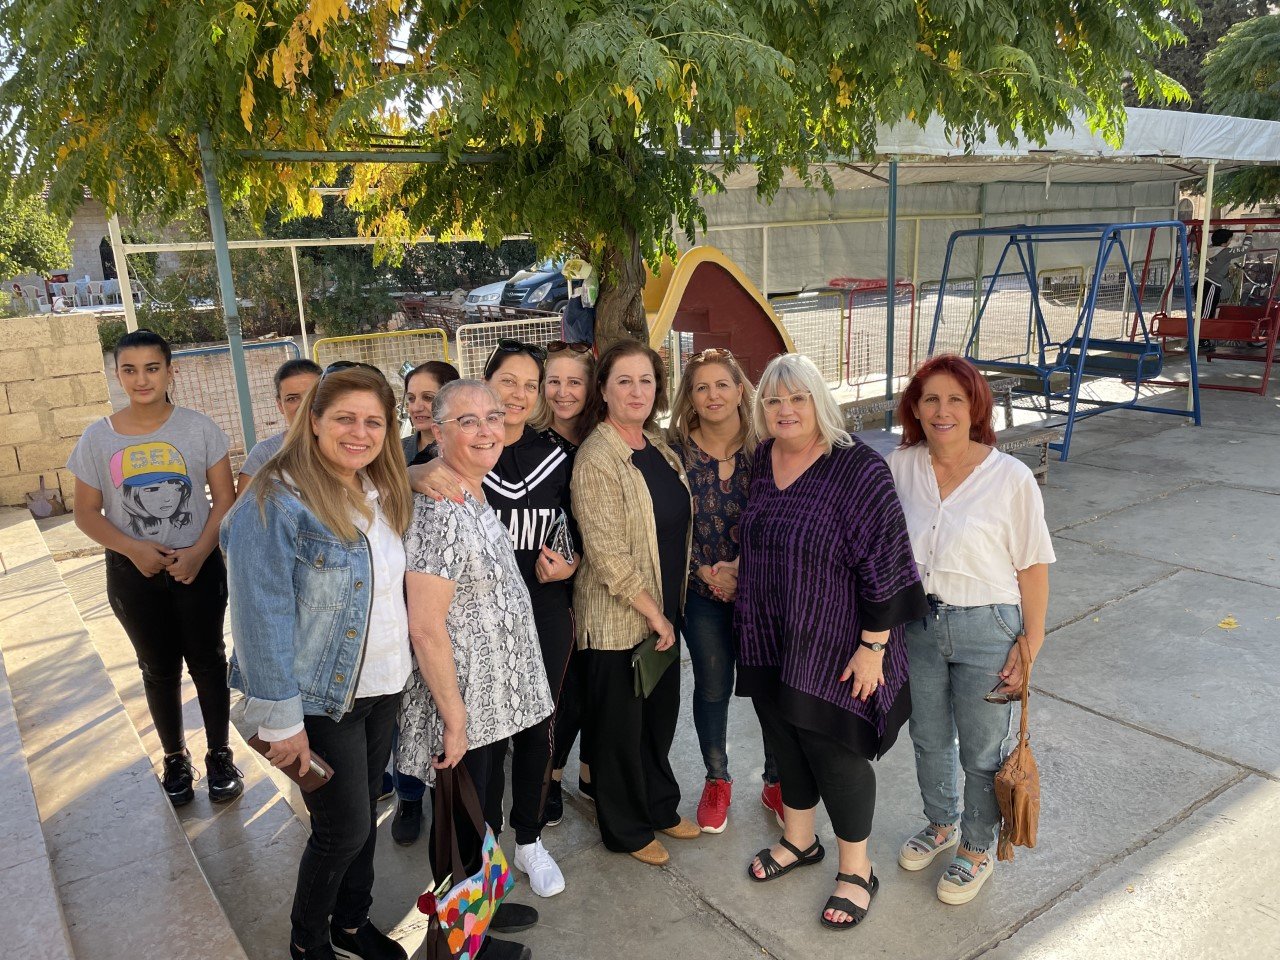  Julie and Marilyn were reunited with many friends at Mahardeh Church whom they had met at the summer women’s conferences in Lebanon 